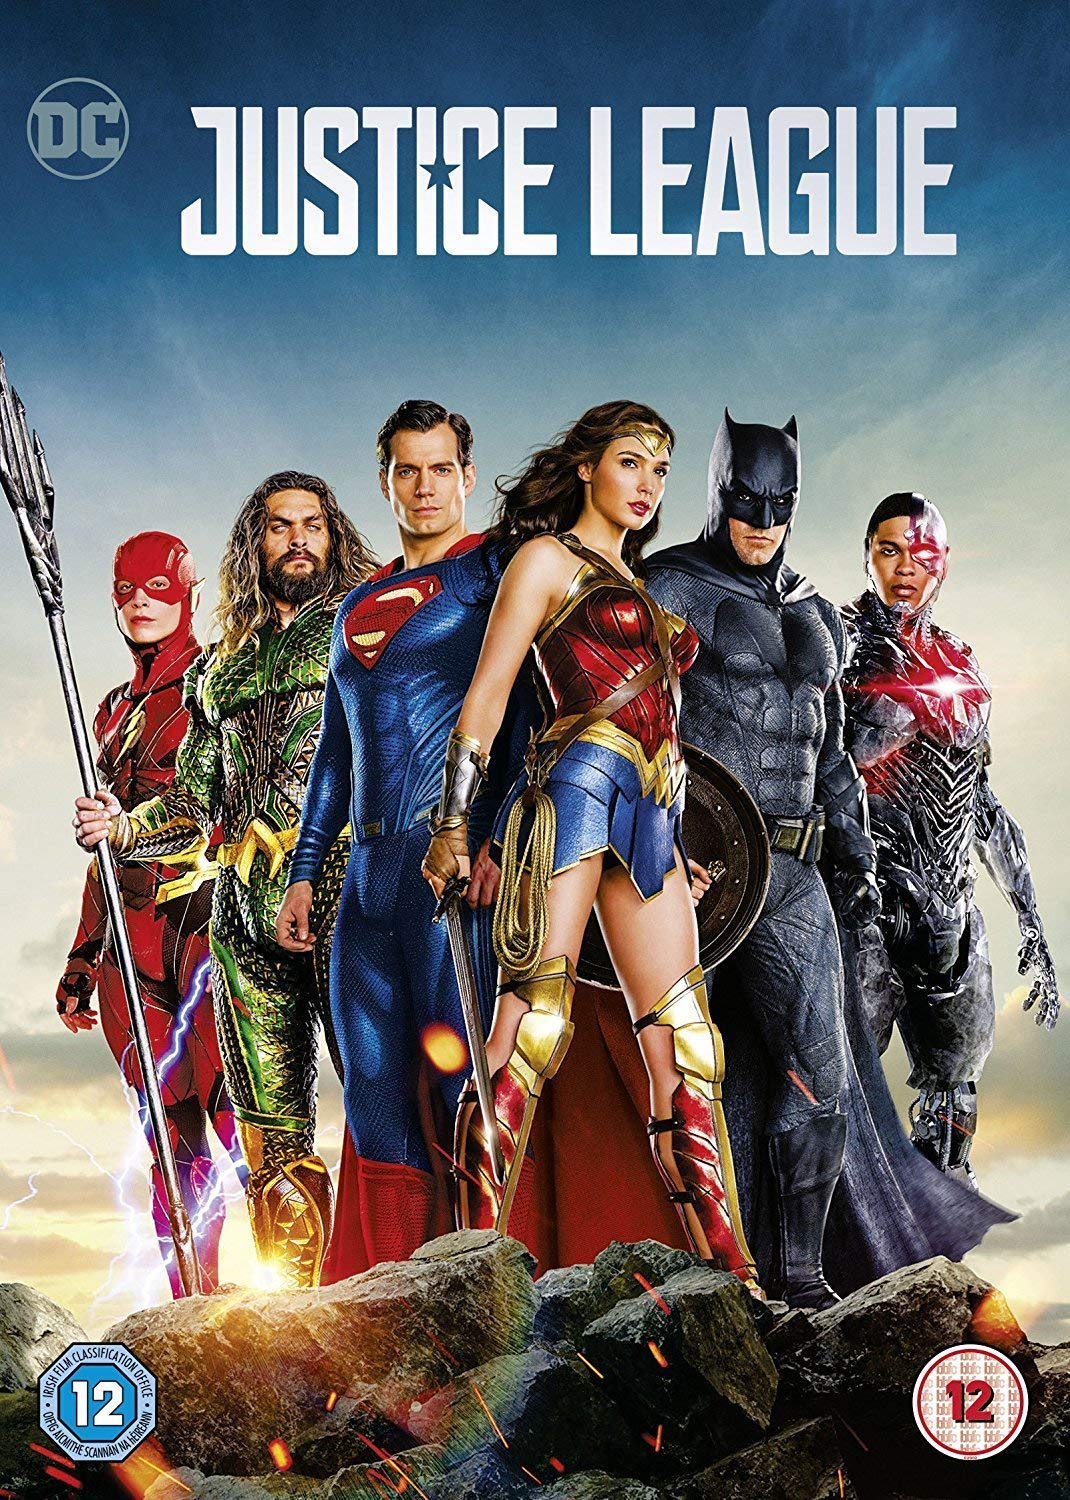 justice league is the dc movies in order of release